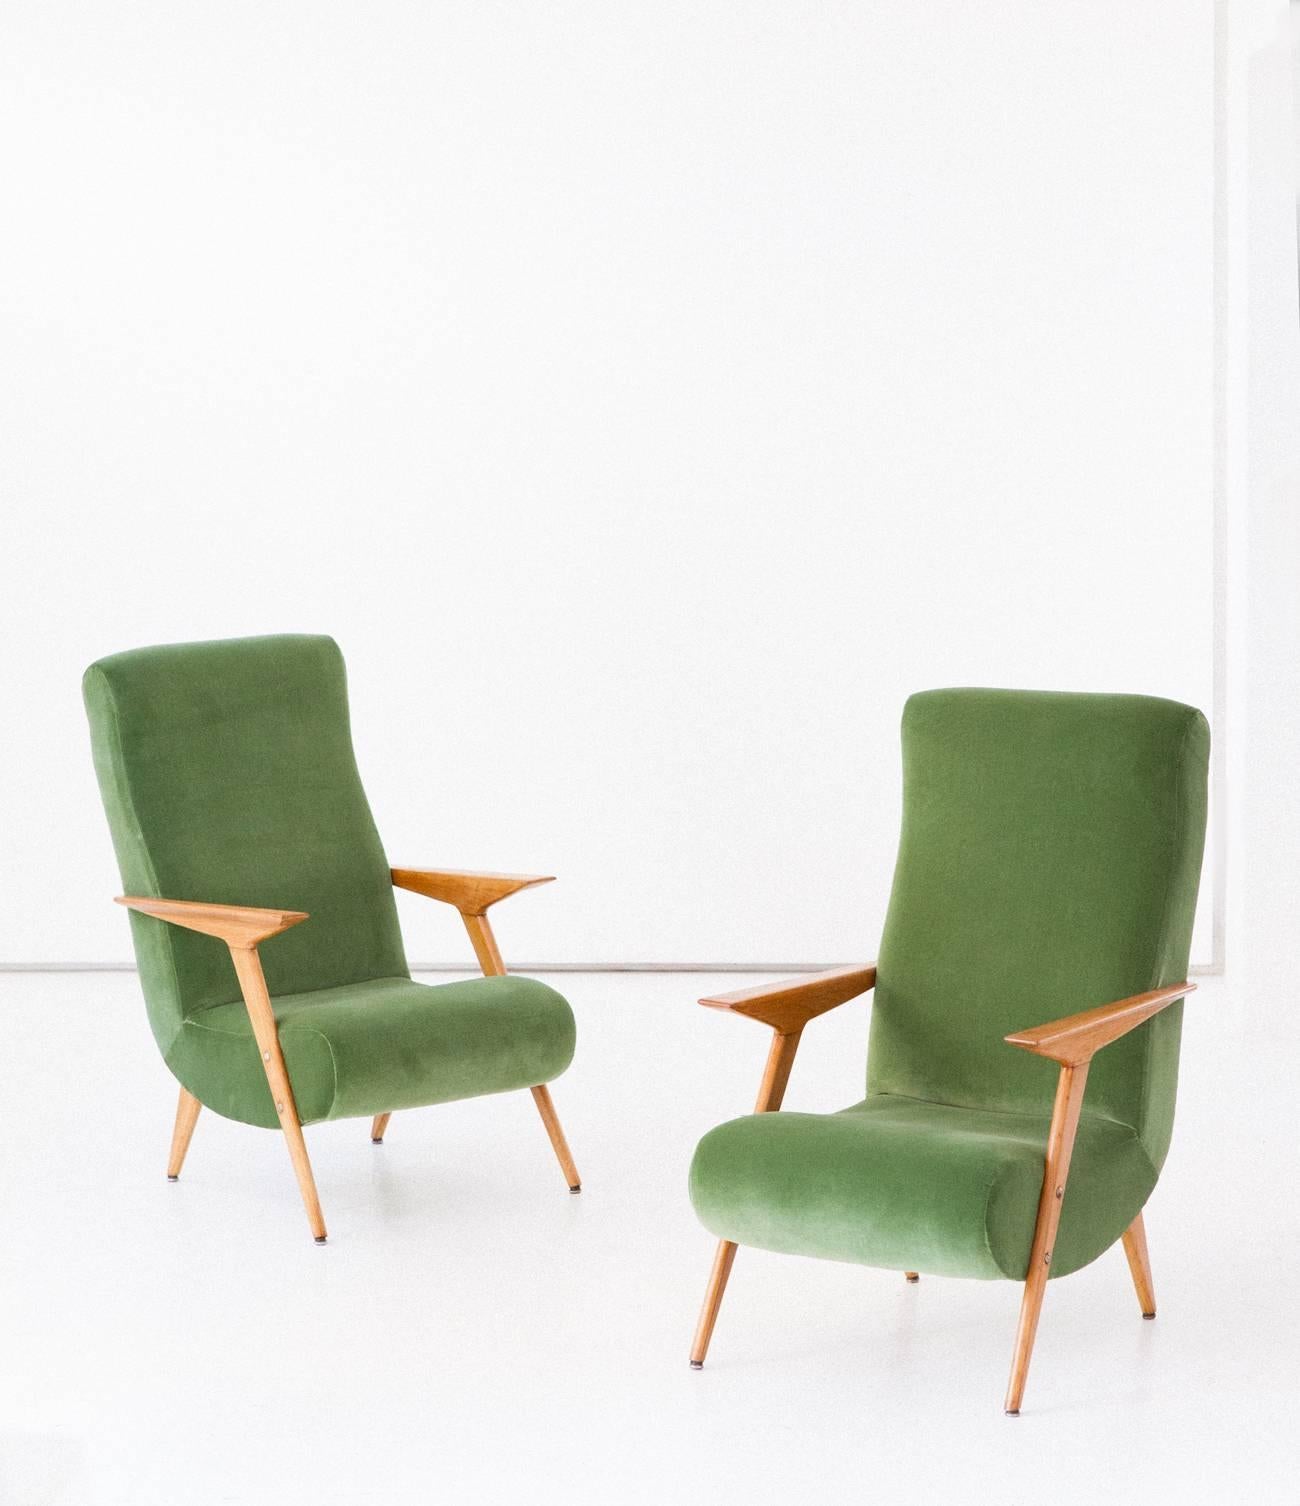 Pair of  Mid-Century ModernLounge chairs with armrests manufactured in Italy in 1950's
Oak wood frame and new green cotton velvet upholstery .

Completely restored.